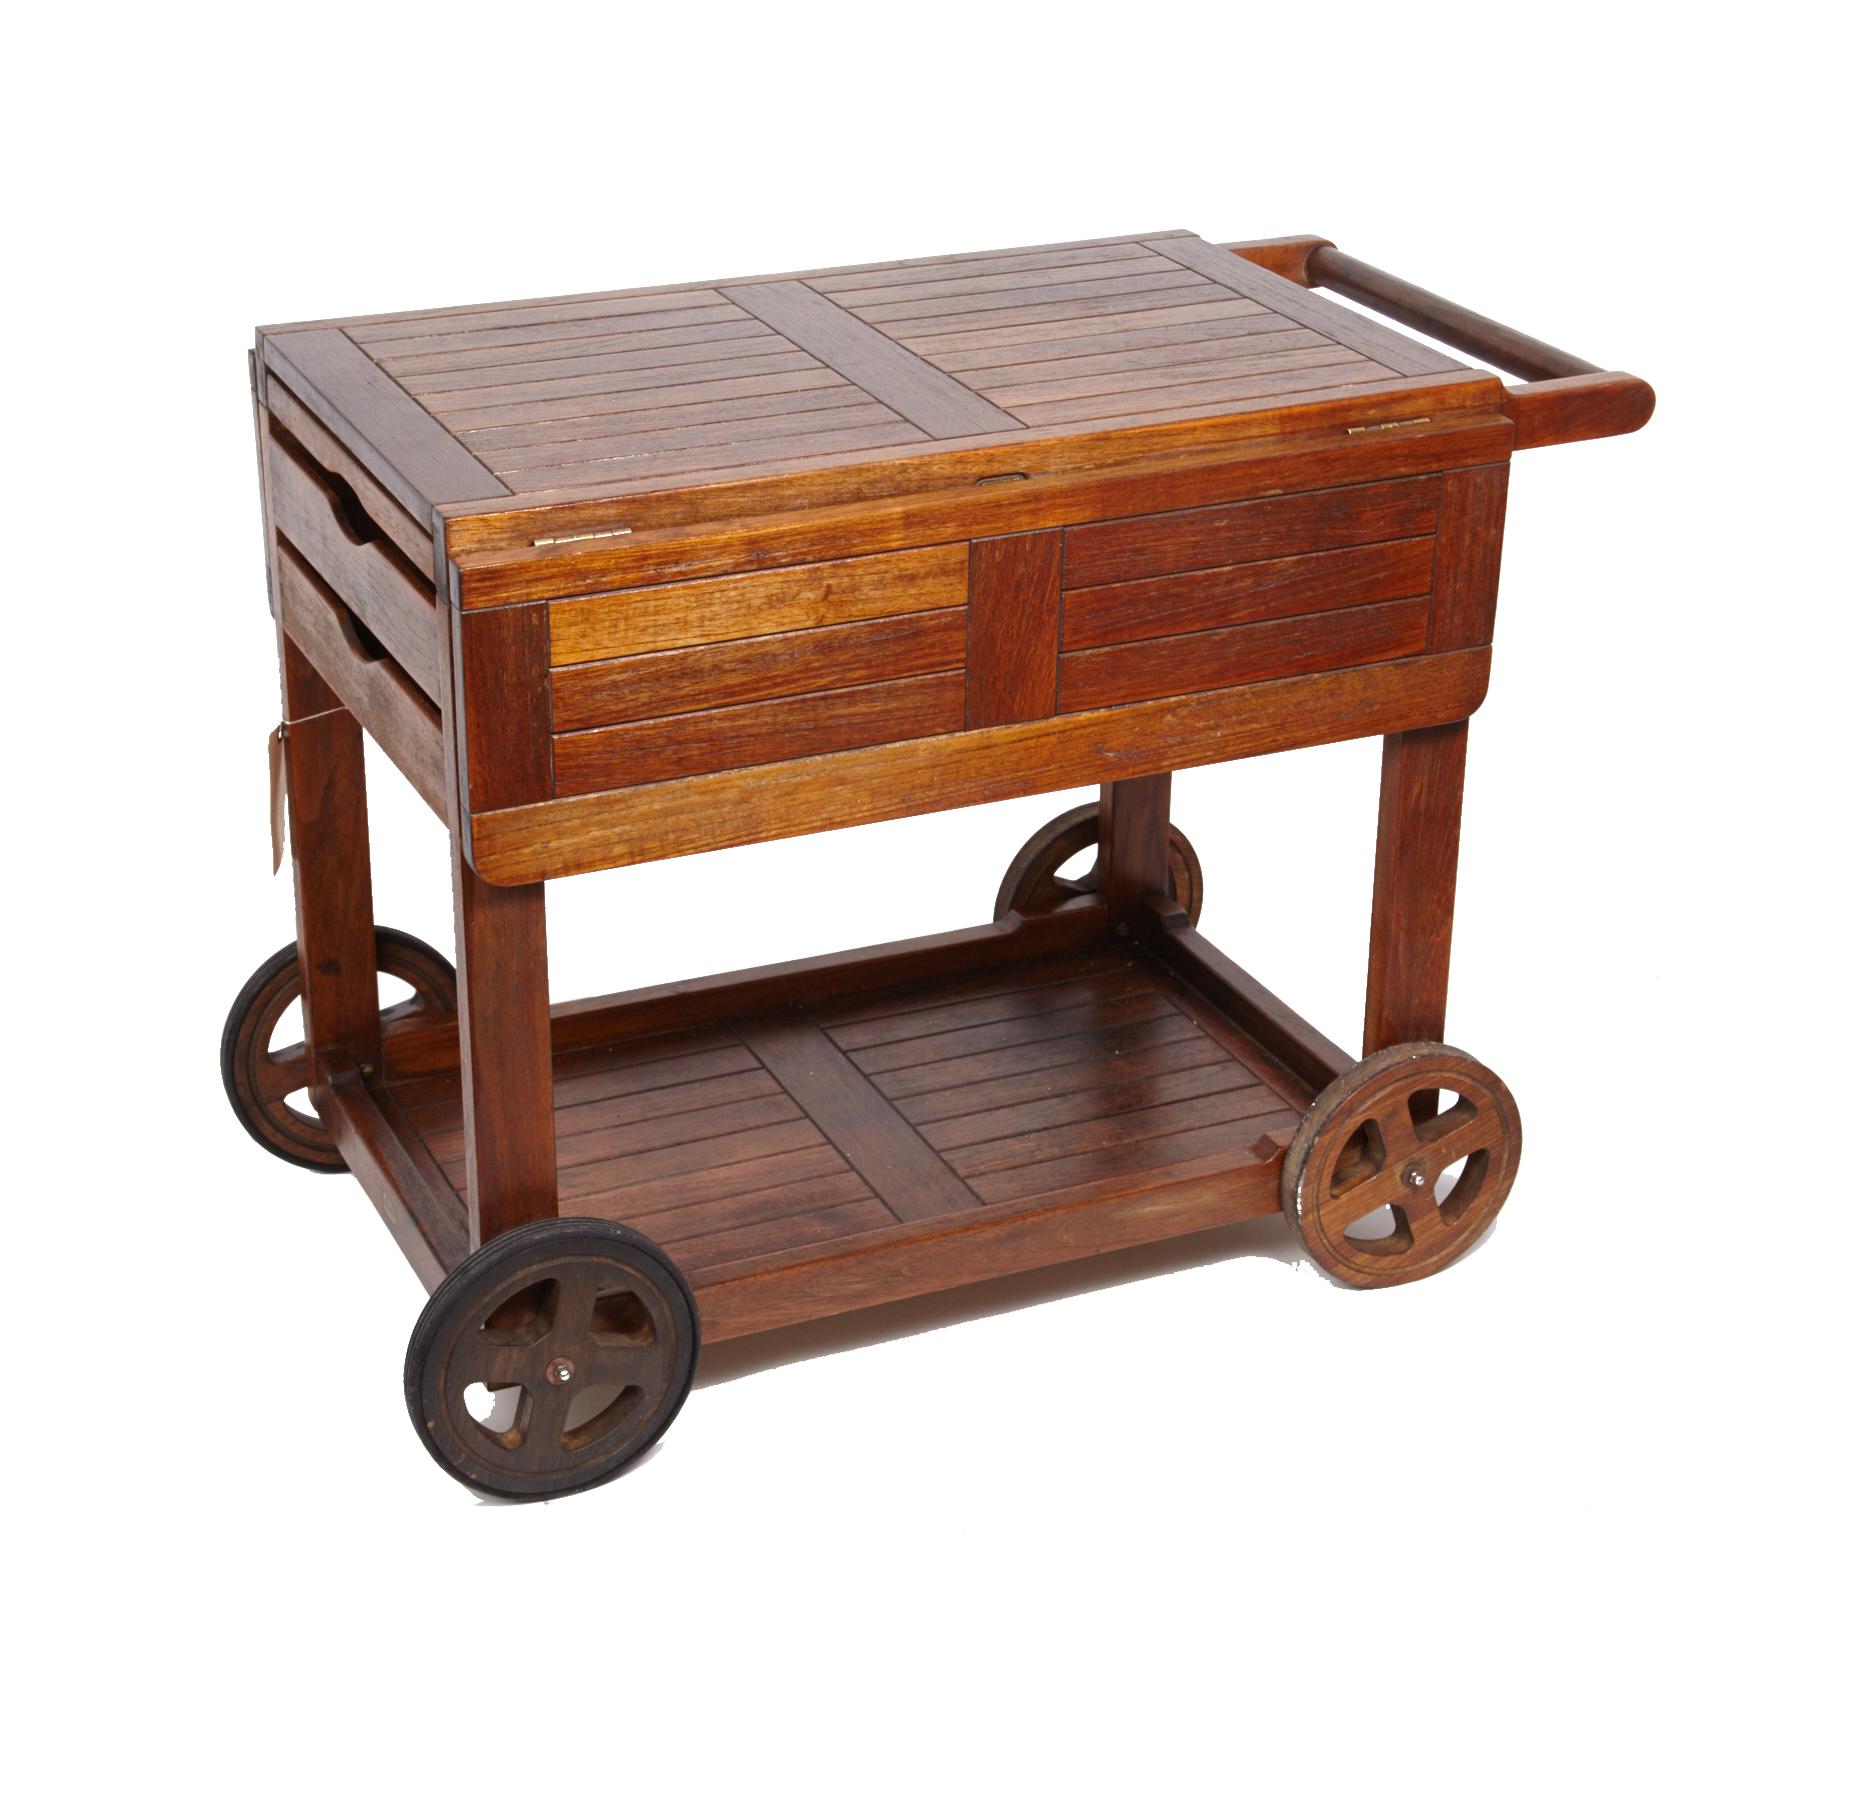 Amazing vintage Gloster teak wheeled serving cart made in Bristol, England in the 1980's. Gloster has been long known as the premier maker of teak furniture. Great for year round use indoors and out. This cart is beautiful original condition and has